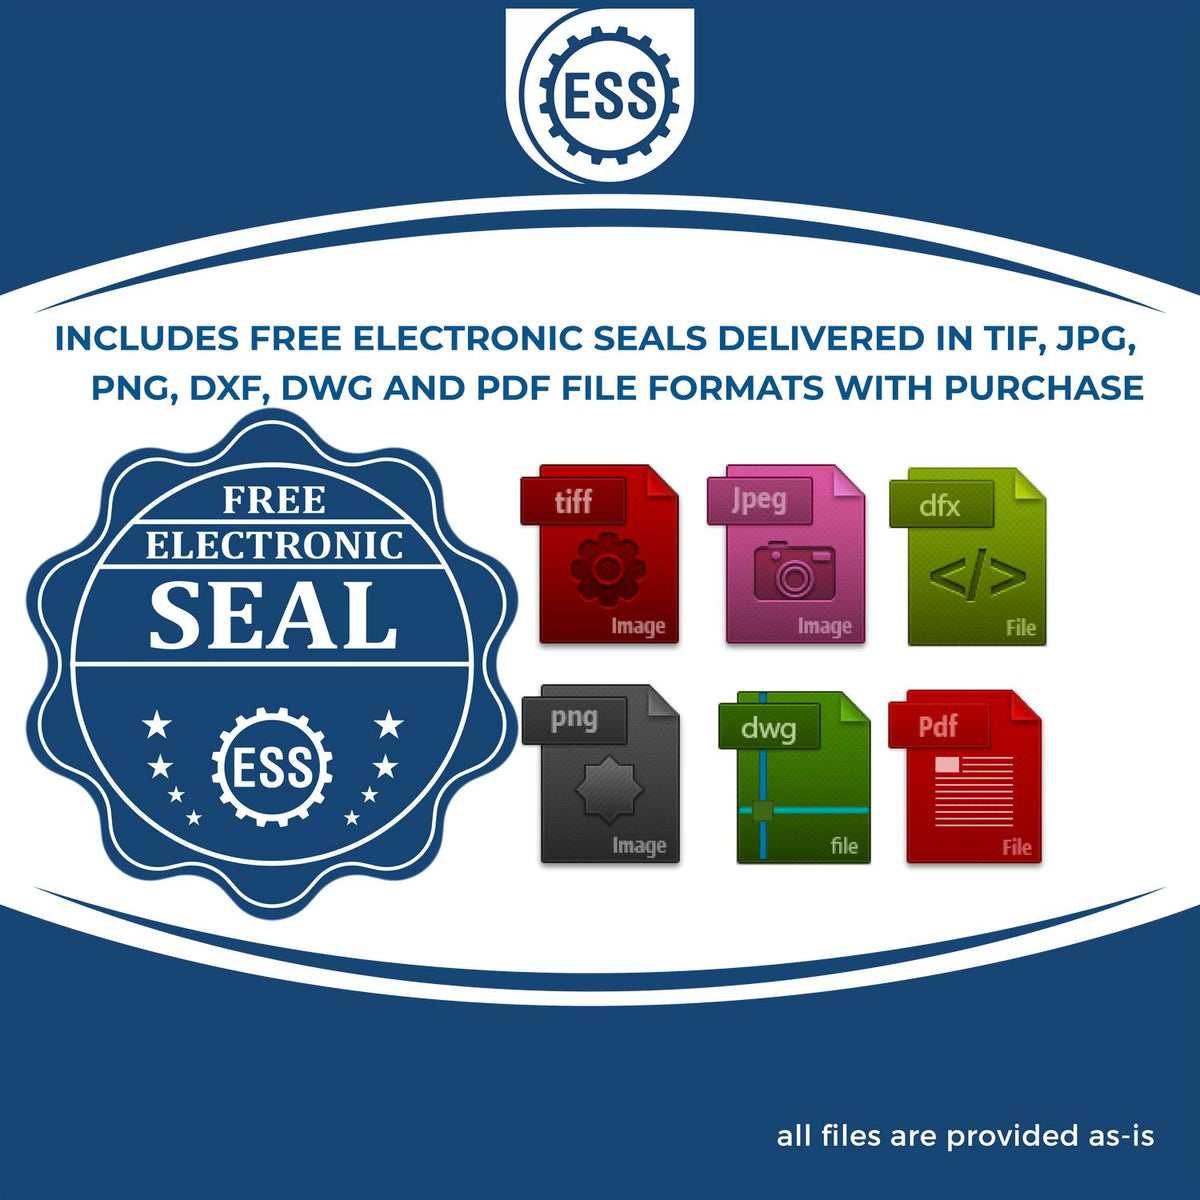 An infographic for the free electronic seal for the Extended Long Reach Alaska Surveyor Embosser illustrating the different file type icons such as DXF, DWG, TIF, JPG and PNG.